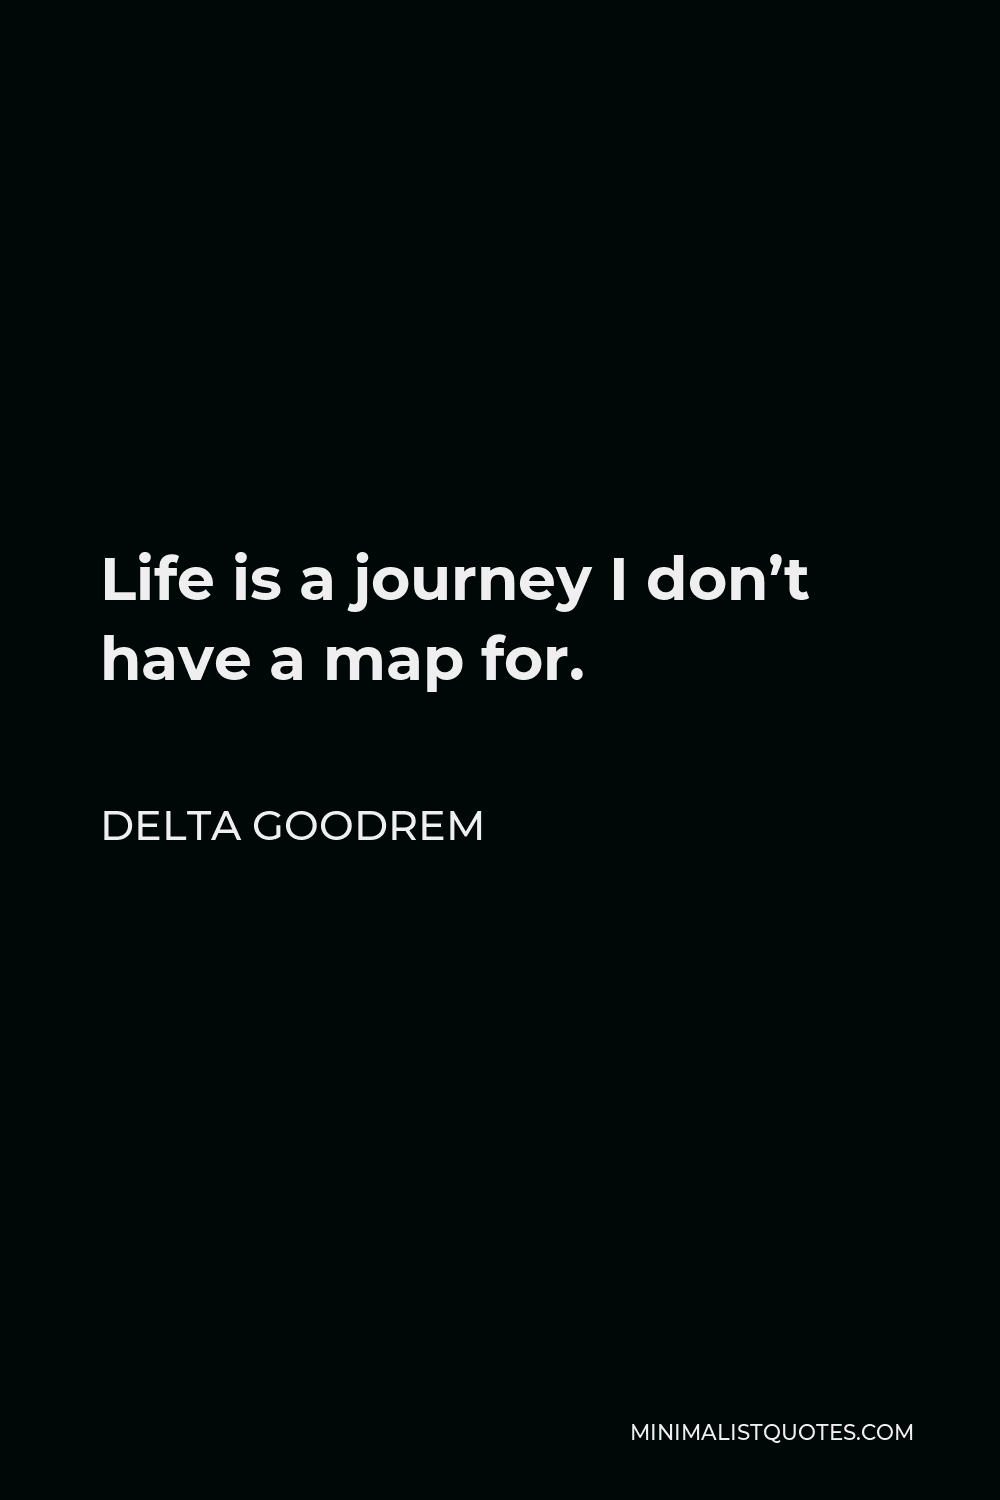 Delta Goodrem Quote - Life is a journey I don’t have a map for.